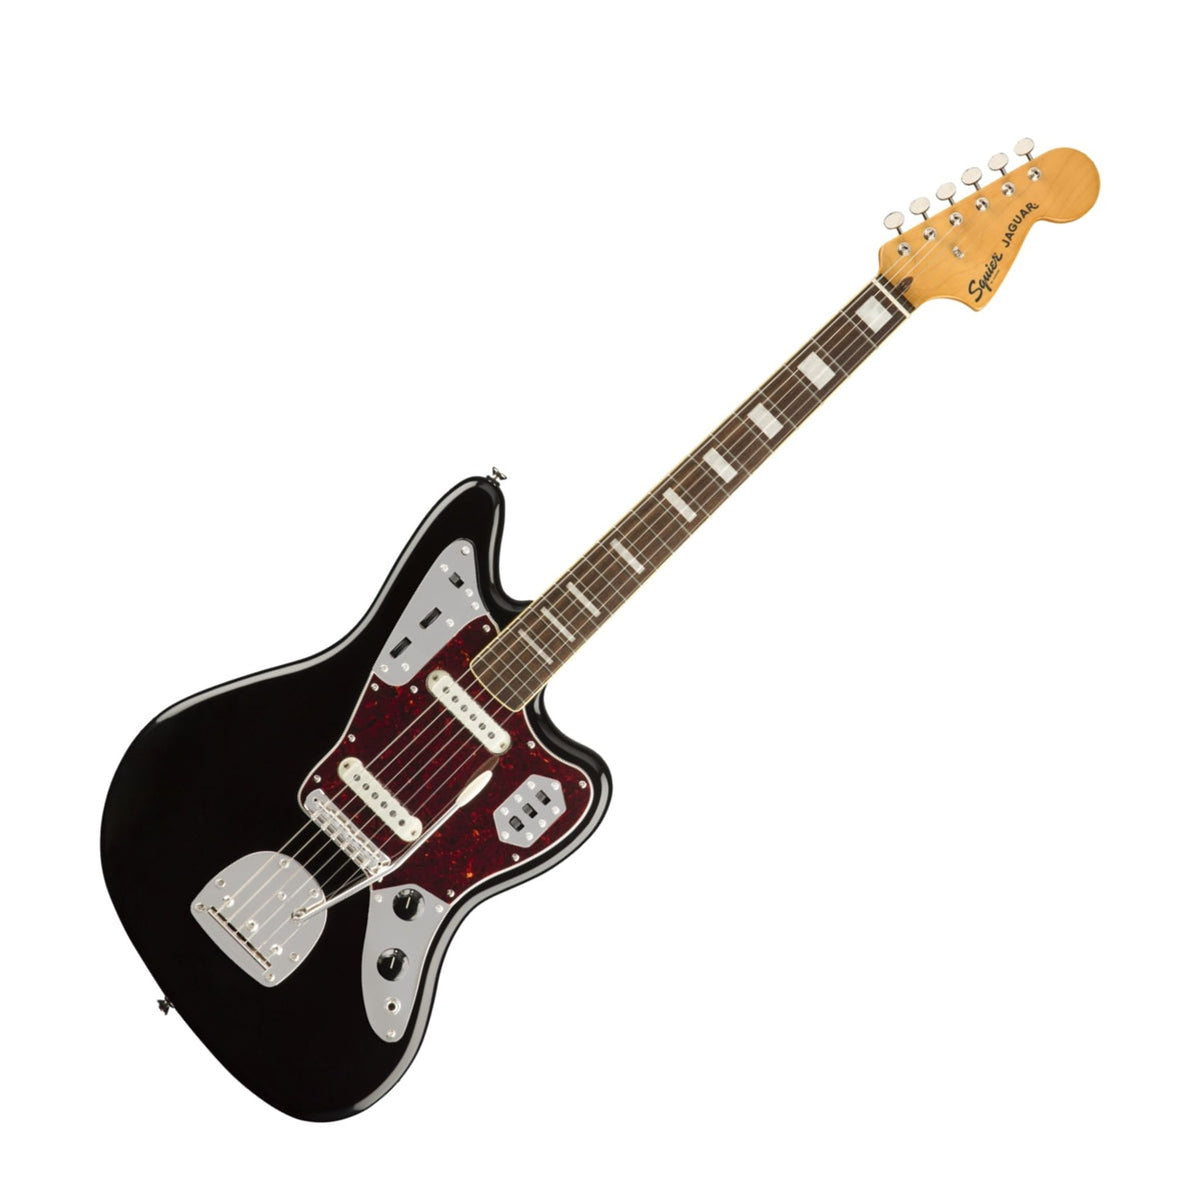 The Fender Squier Classic Vibe 70s Jaguar Electric Guitar turns up the volume on retro style and produces incredible tone courtesy of its dual Fender-Designed alnico single coil pickups